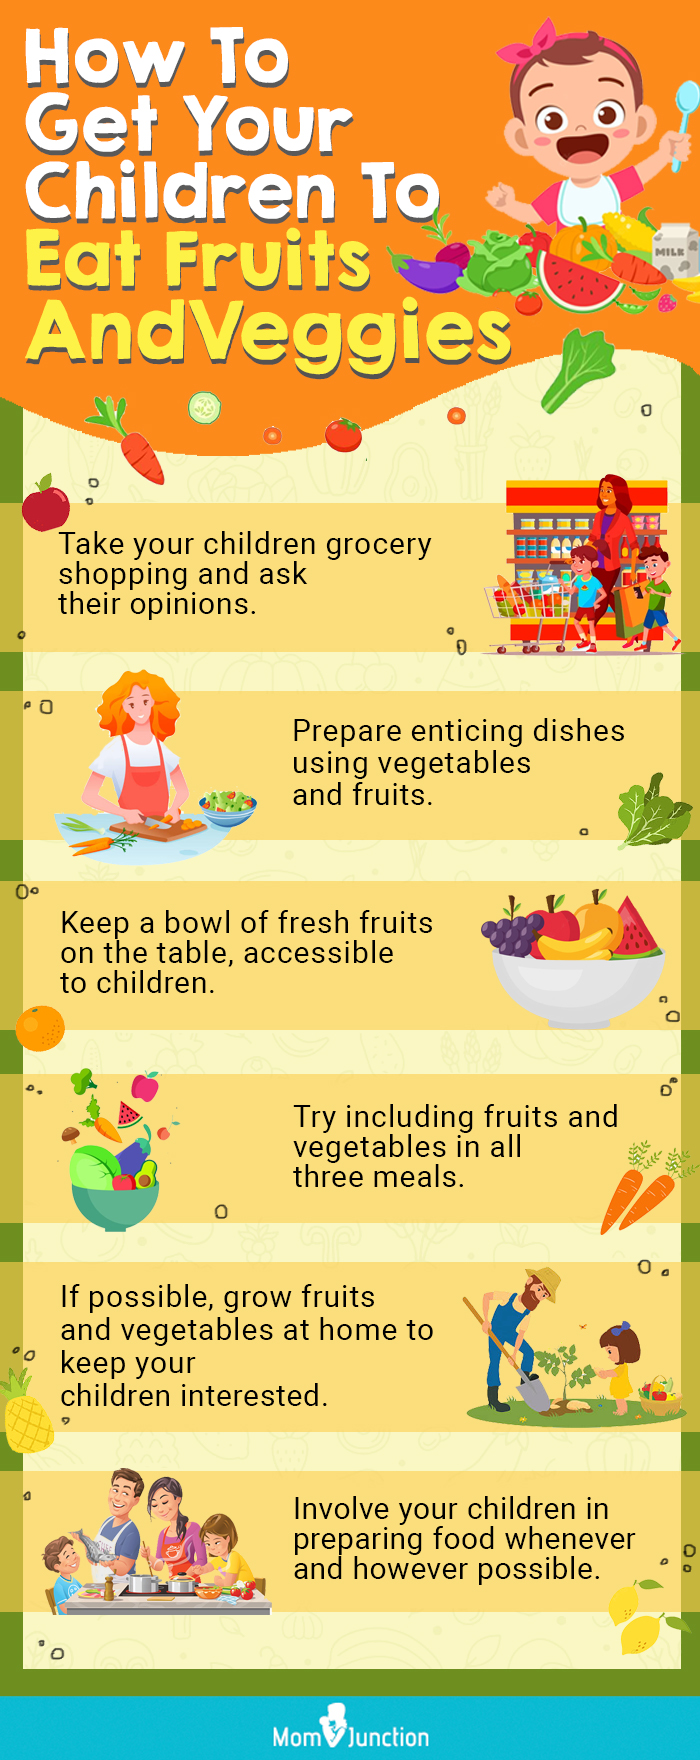 how to get your children to eat fruits and veggies [infographic]